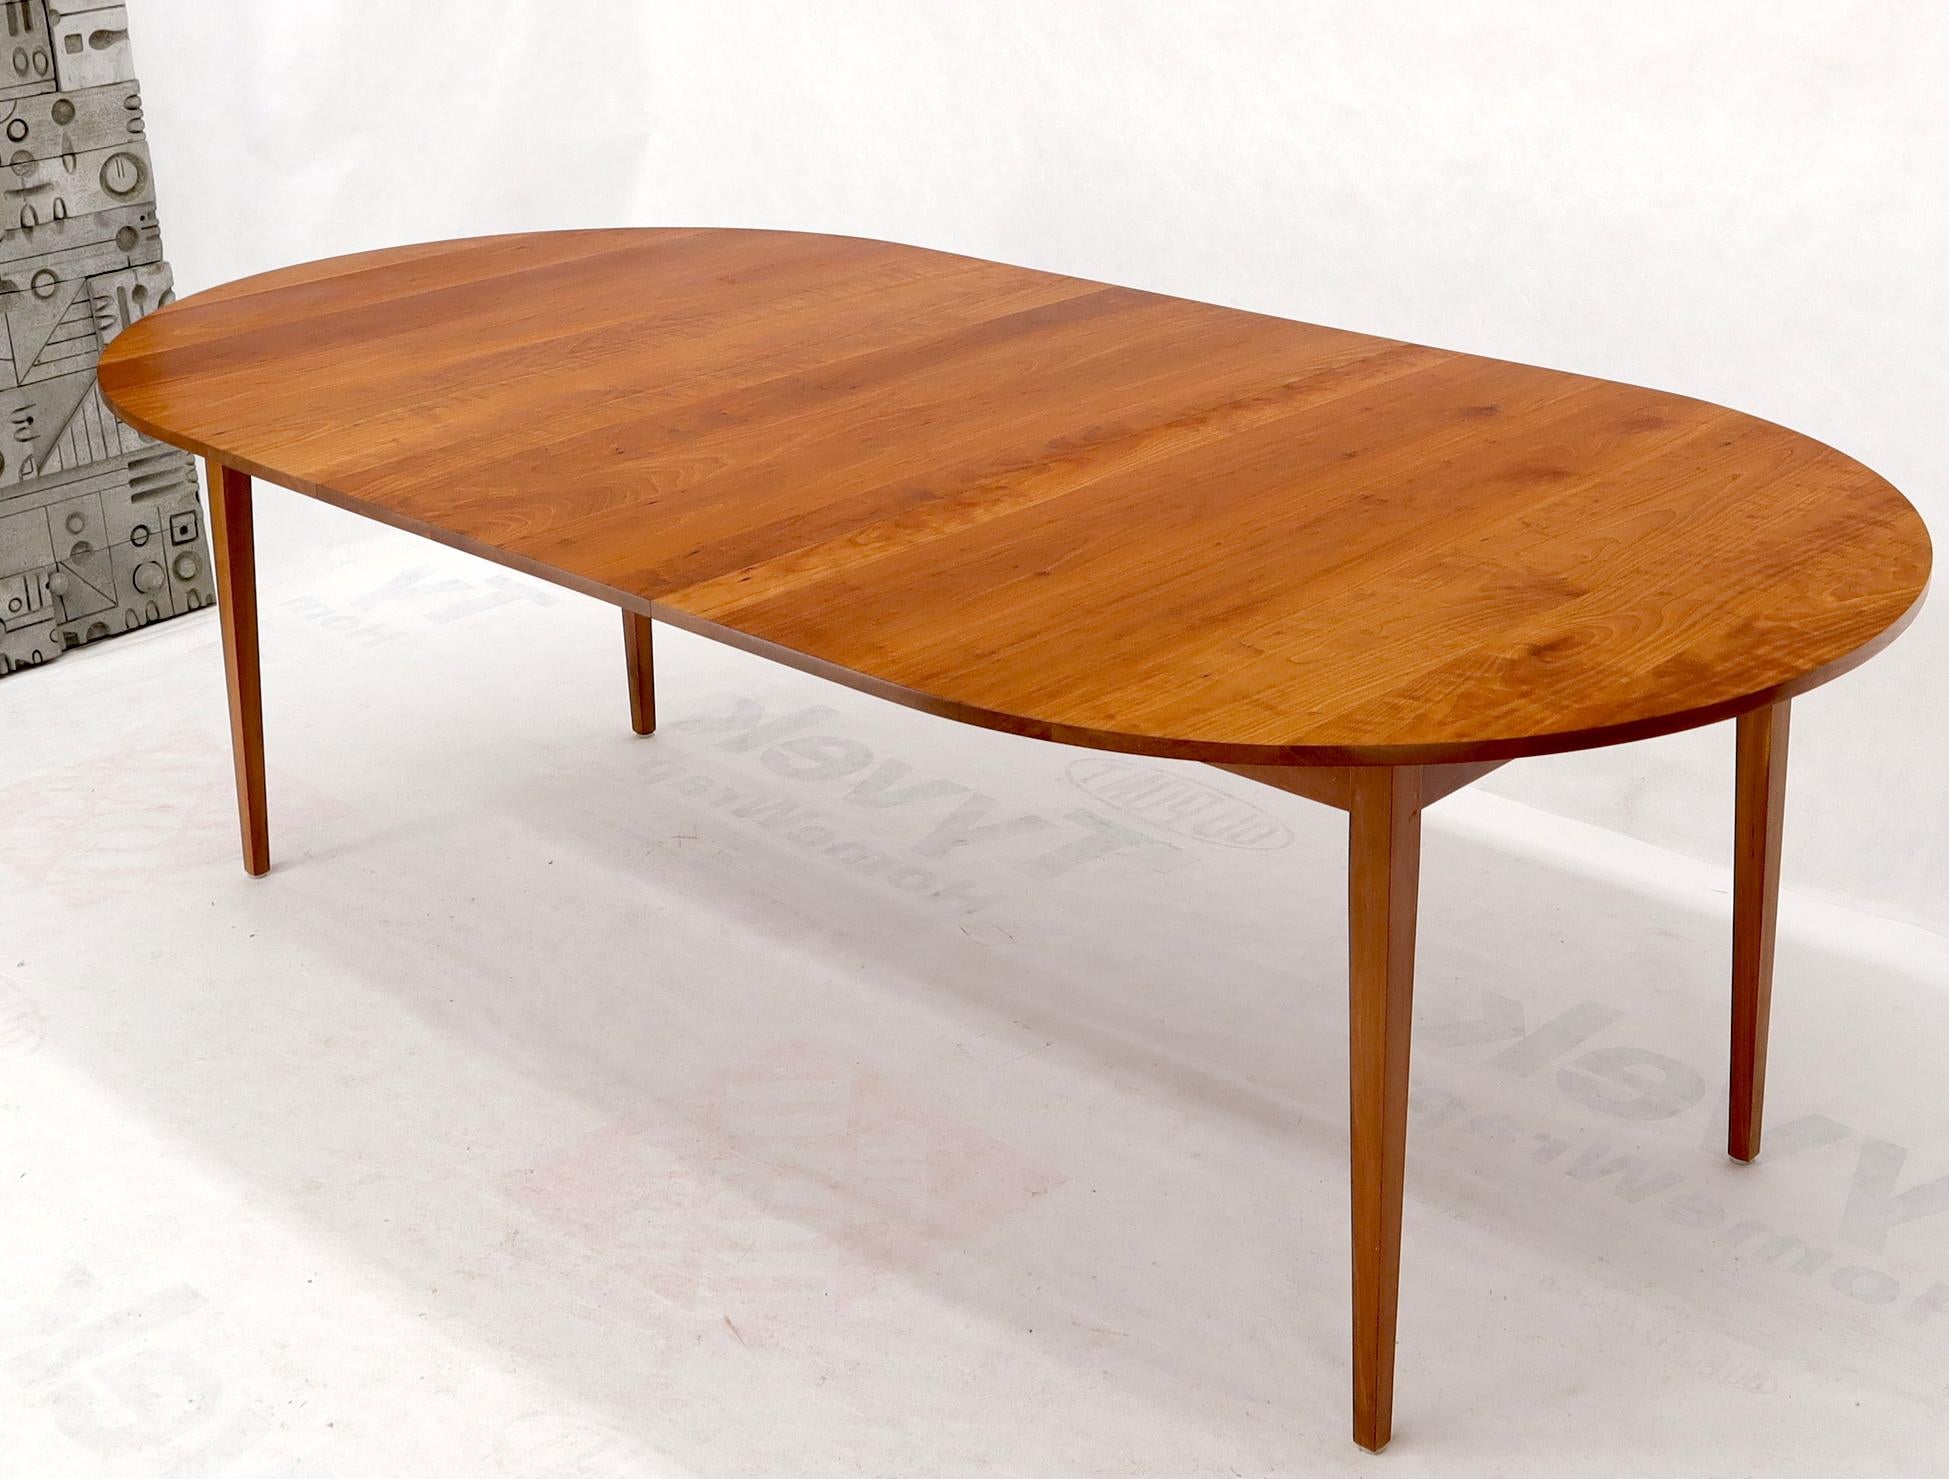 Thomas Moser Signed Oval Solid Cherry Dining Table with One Leaf 1